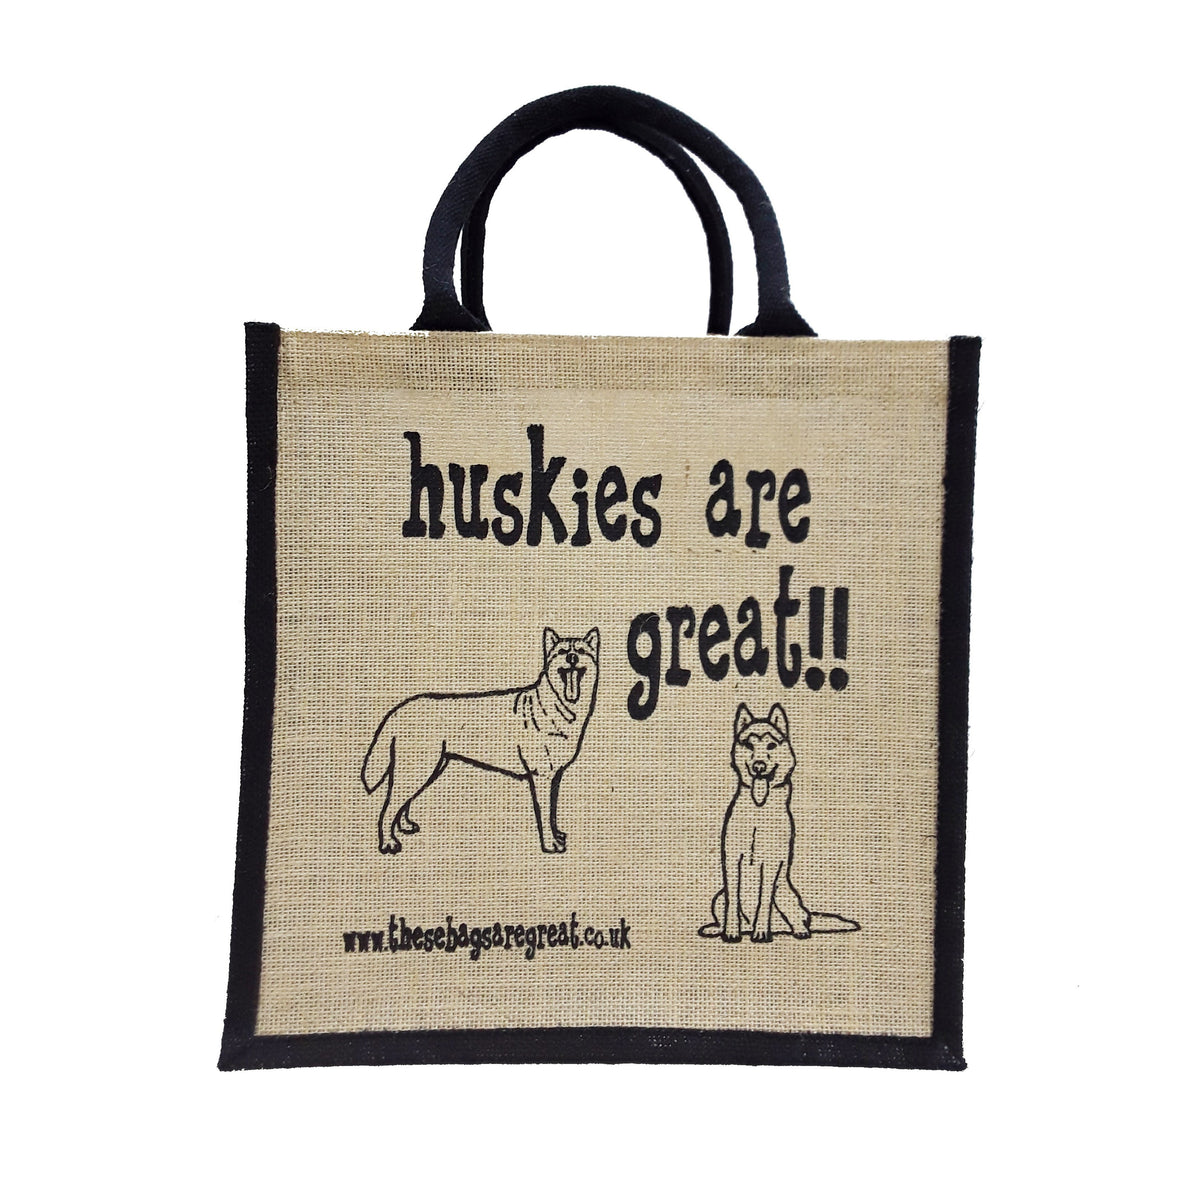 "Dogs are Great" Jute Shopper from These Bags Are Great Good Size Bag 